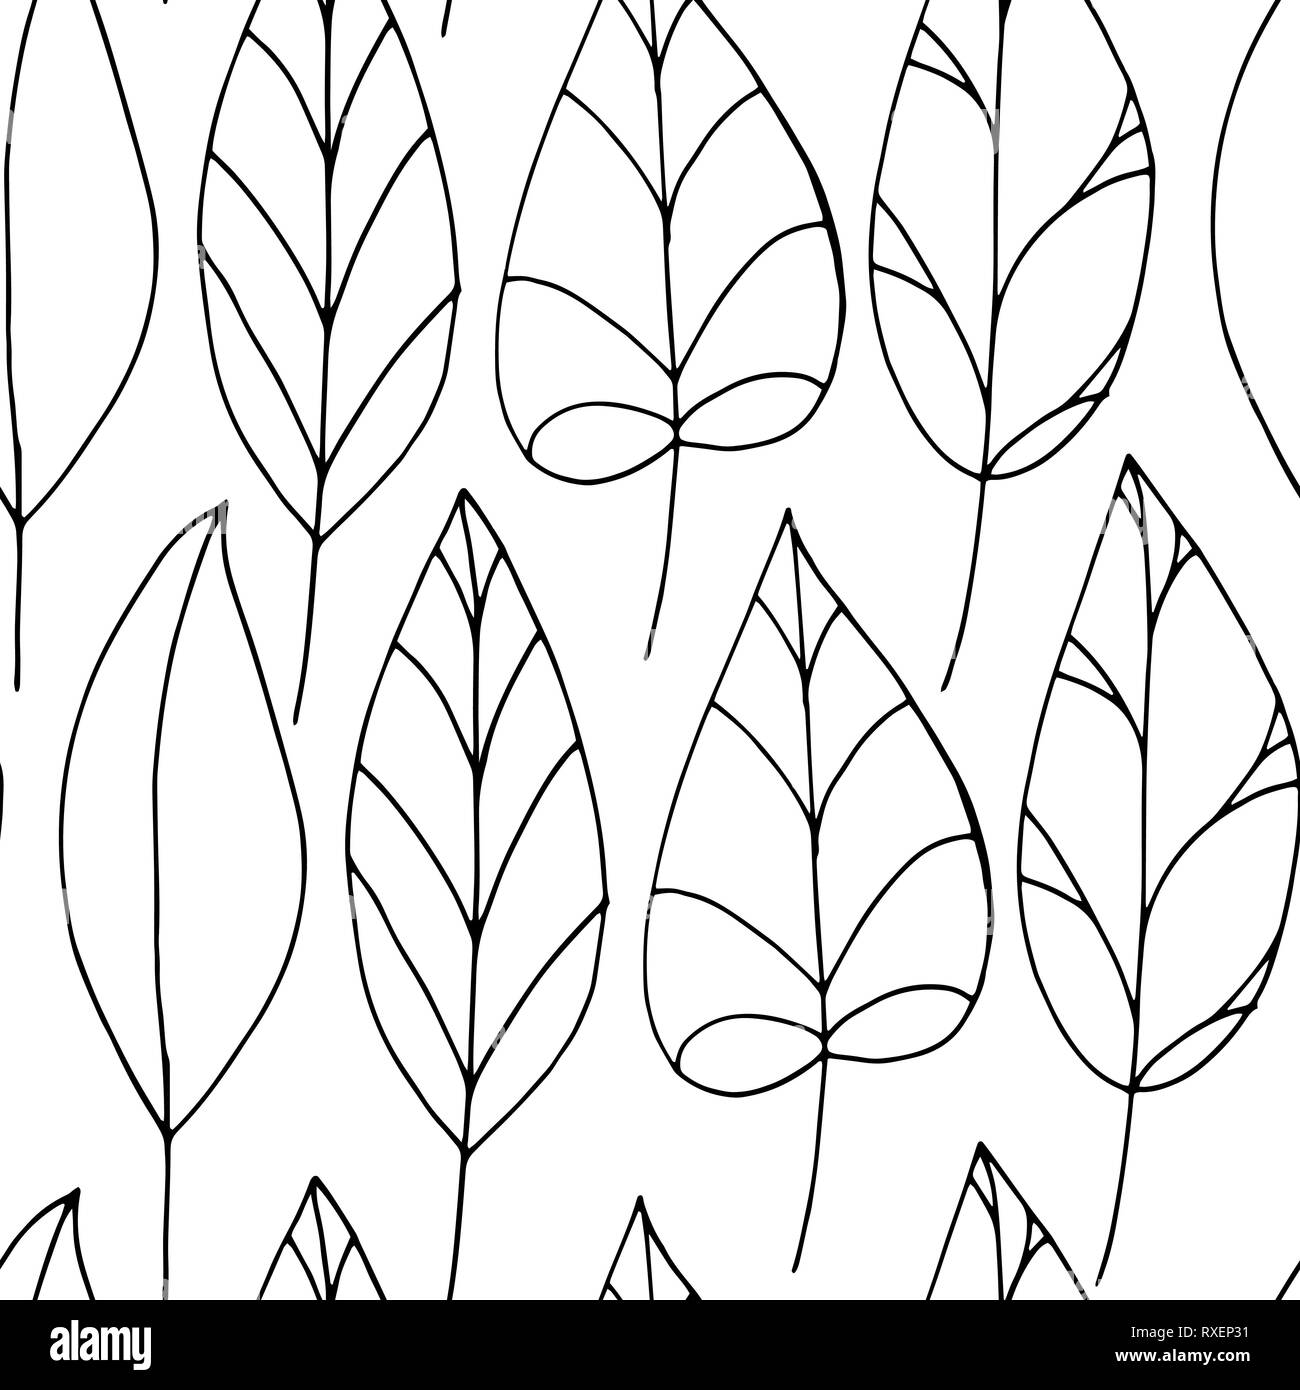 Vector doodle seamless pattern with black colorless leaves on white background. Repeating wallpaper. Hand drawn illustration with abstract leaves. Stock Vector